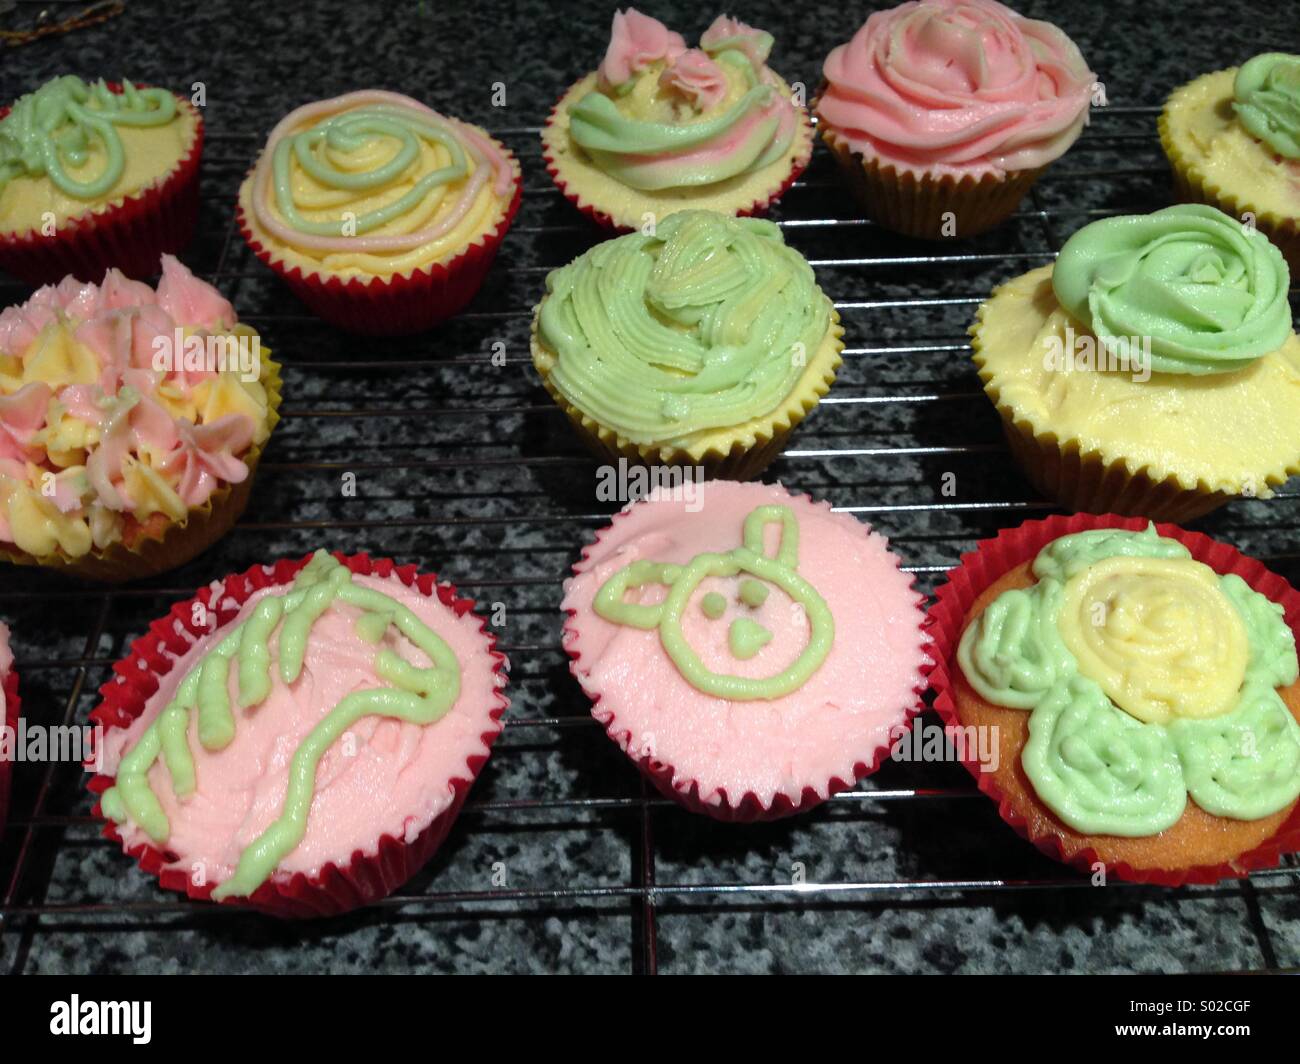 Home made cup cakes decorated with butter cream icing Stock Photo